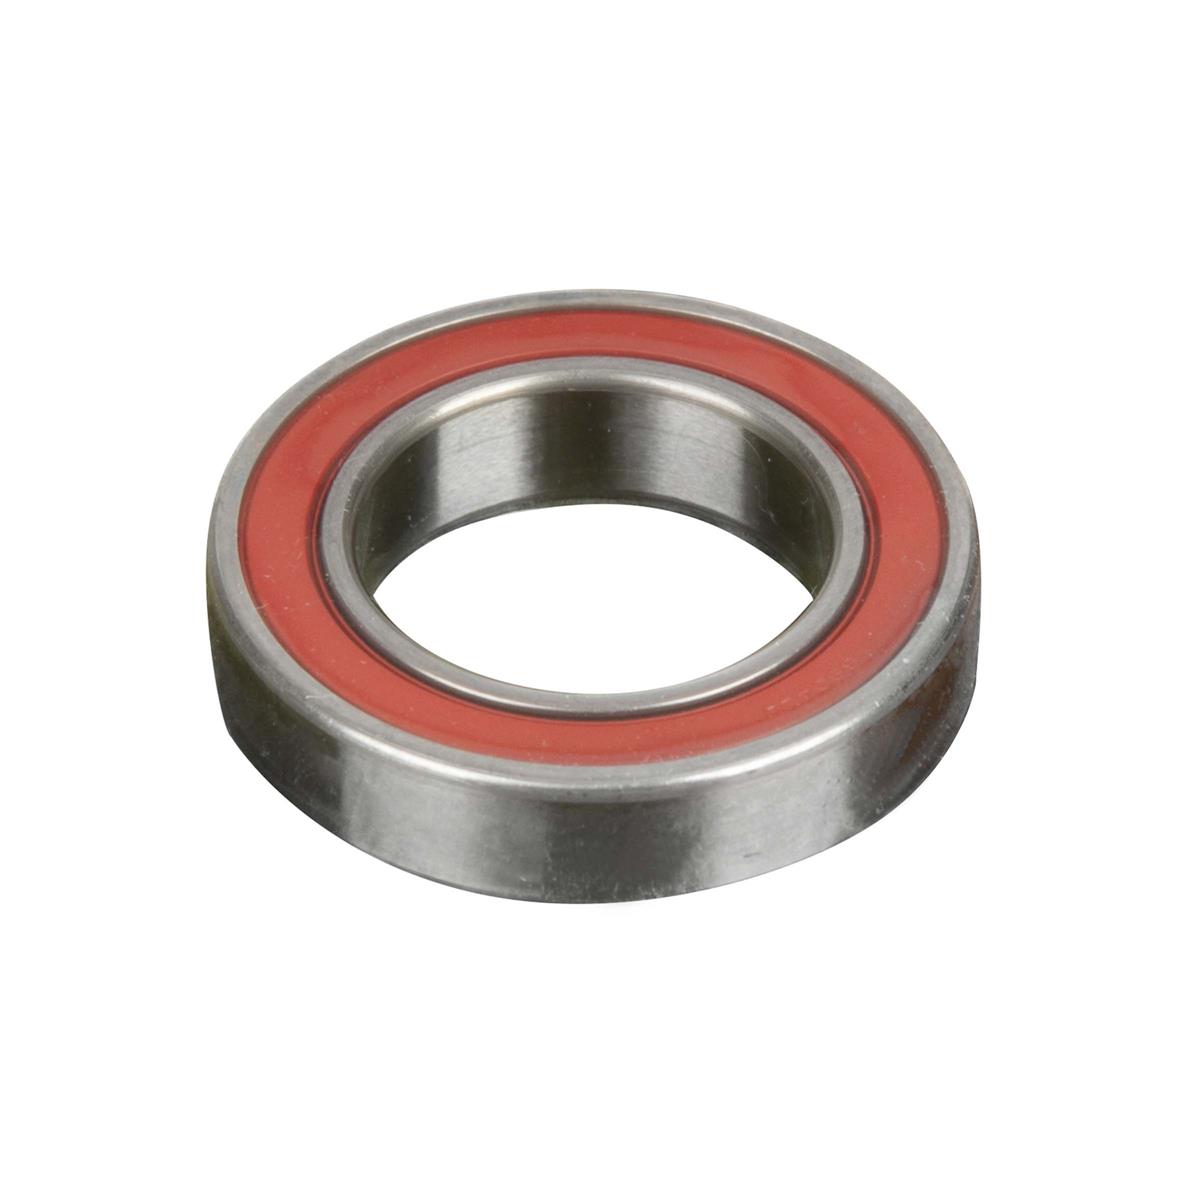 E*thirteen Replacement Hub Shell Bearing  Front, TRS/LG1 Race or TRS/LG1+ drive or non-drive side